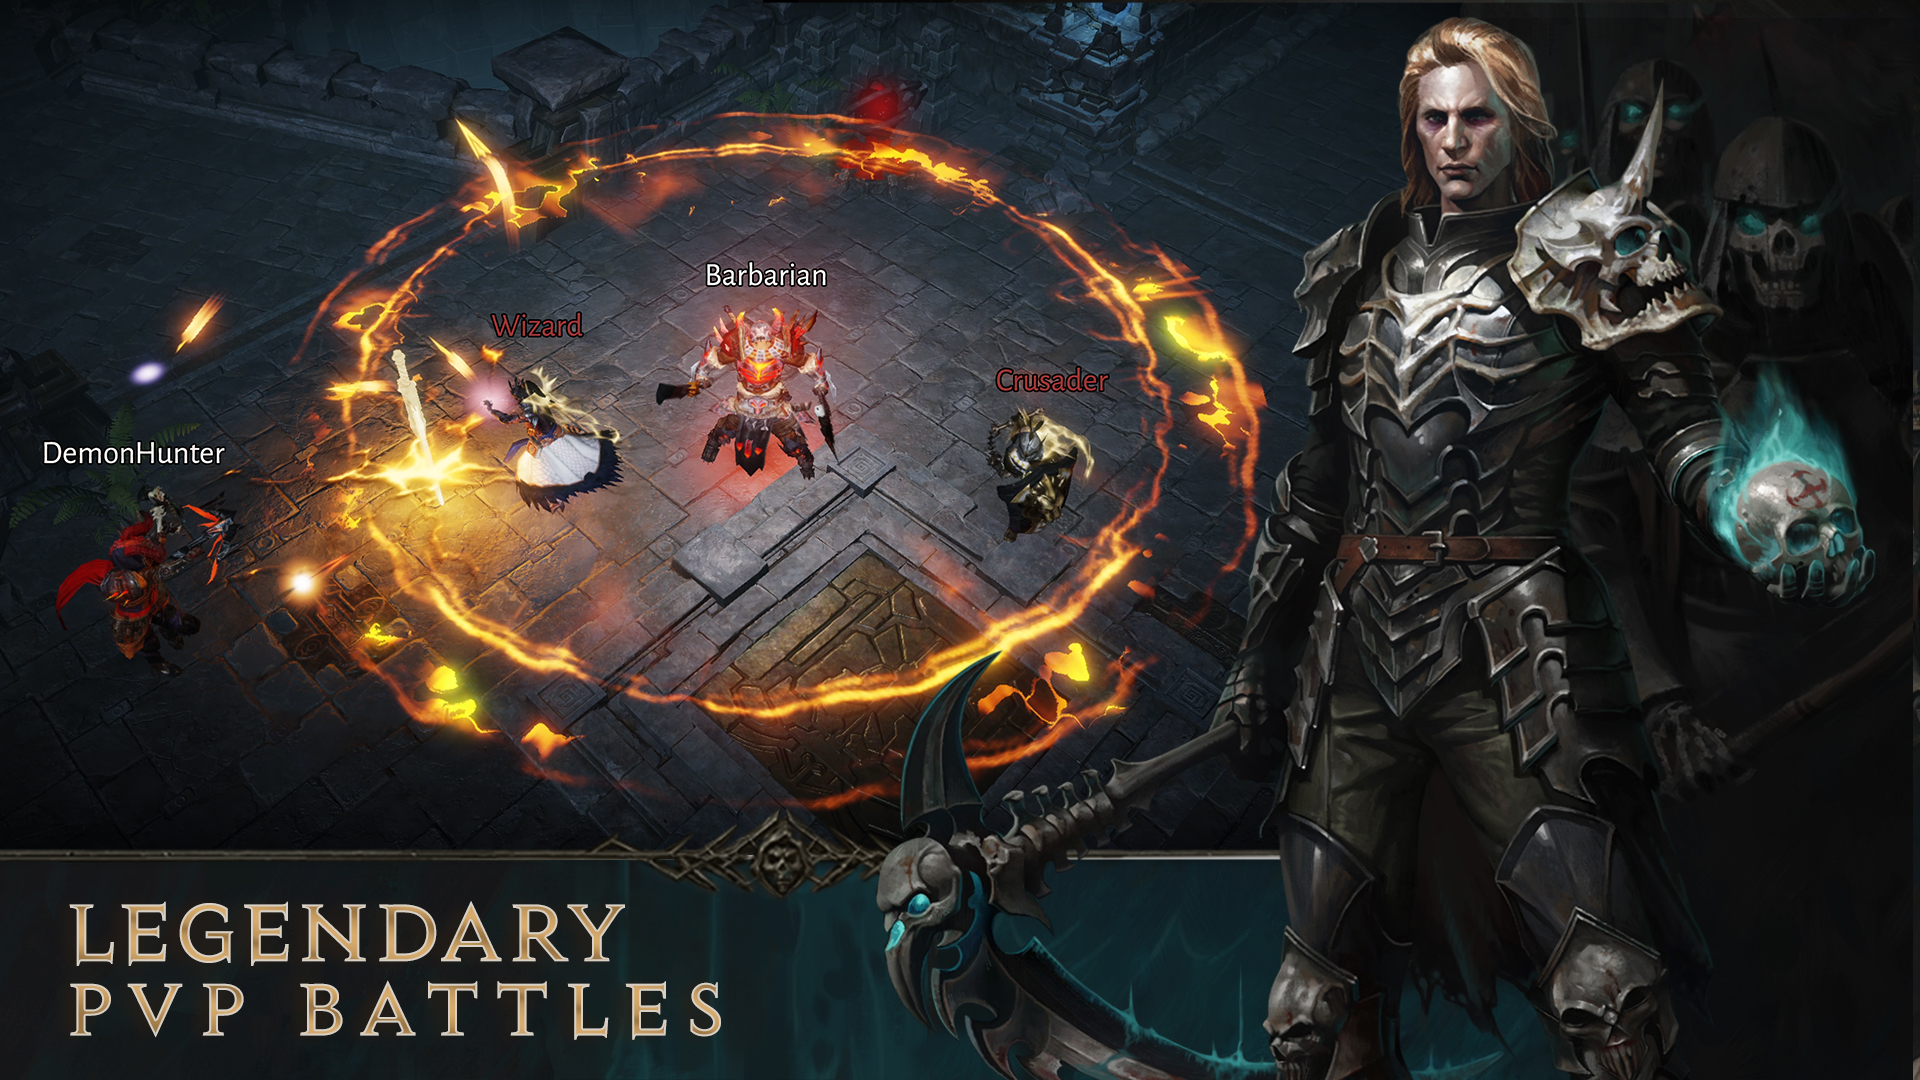 Diablo Immortal Game Guides: Tips for by Hirthe, Irwin